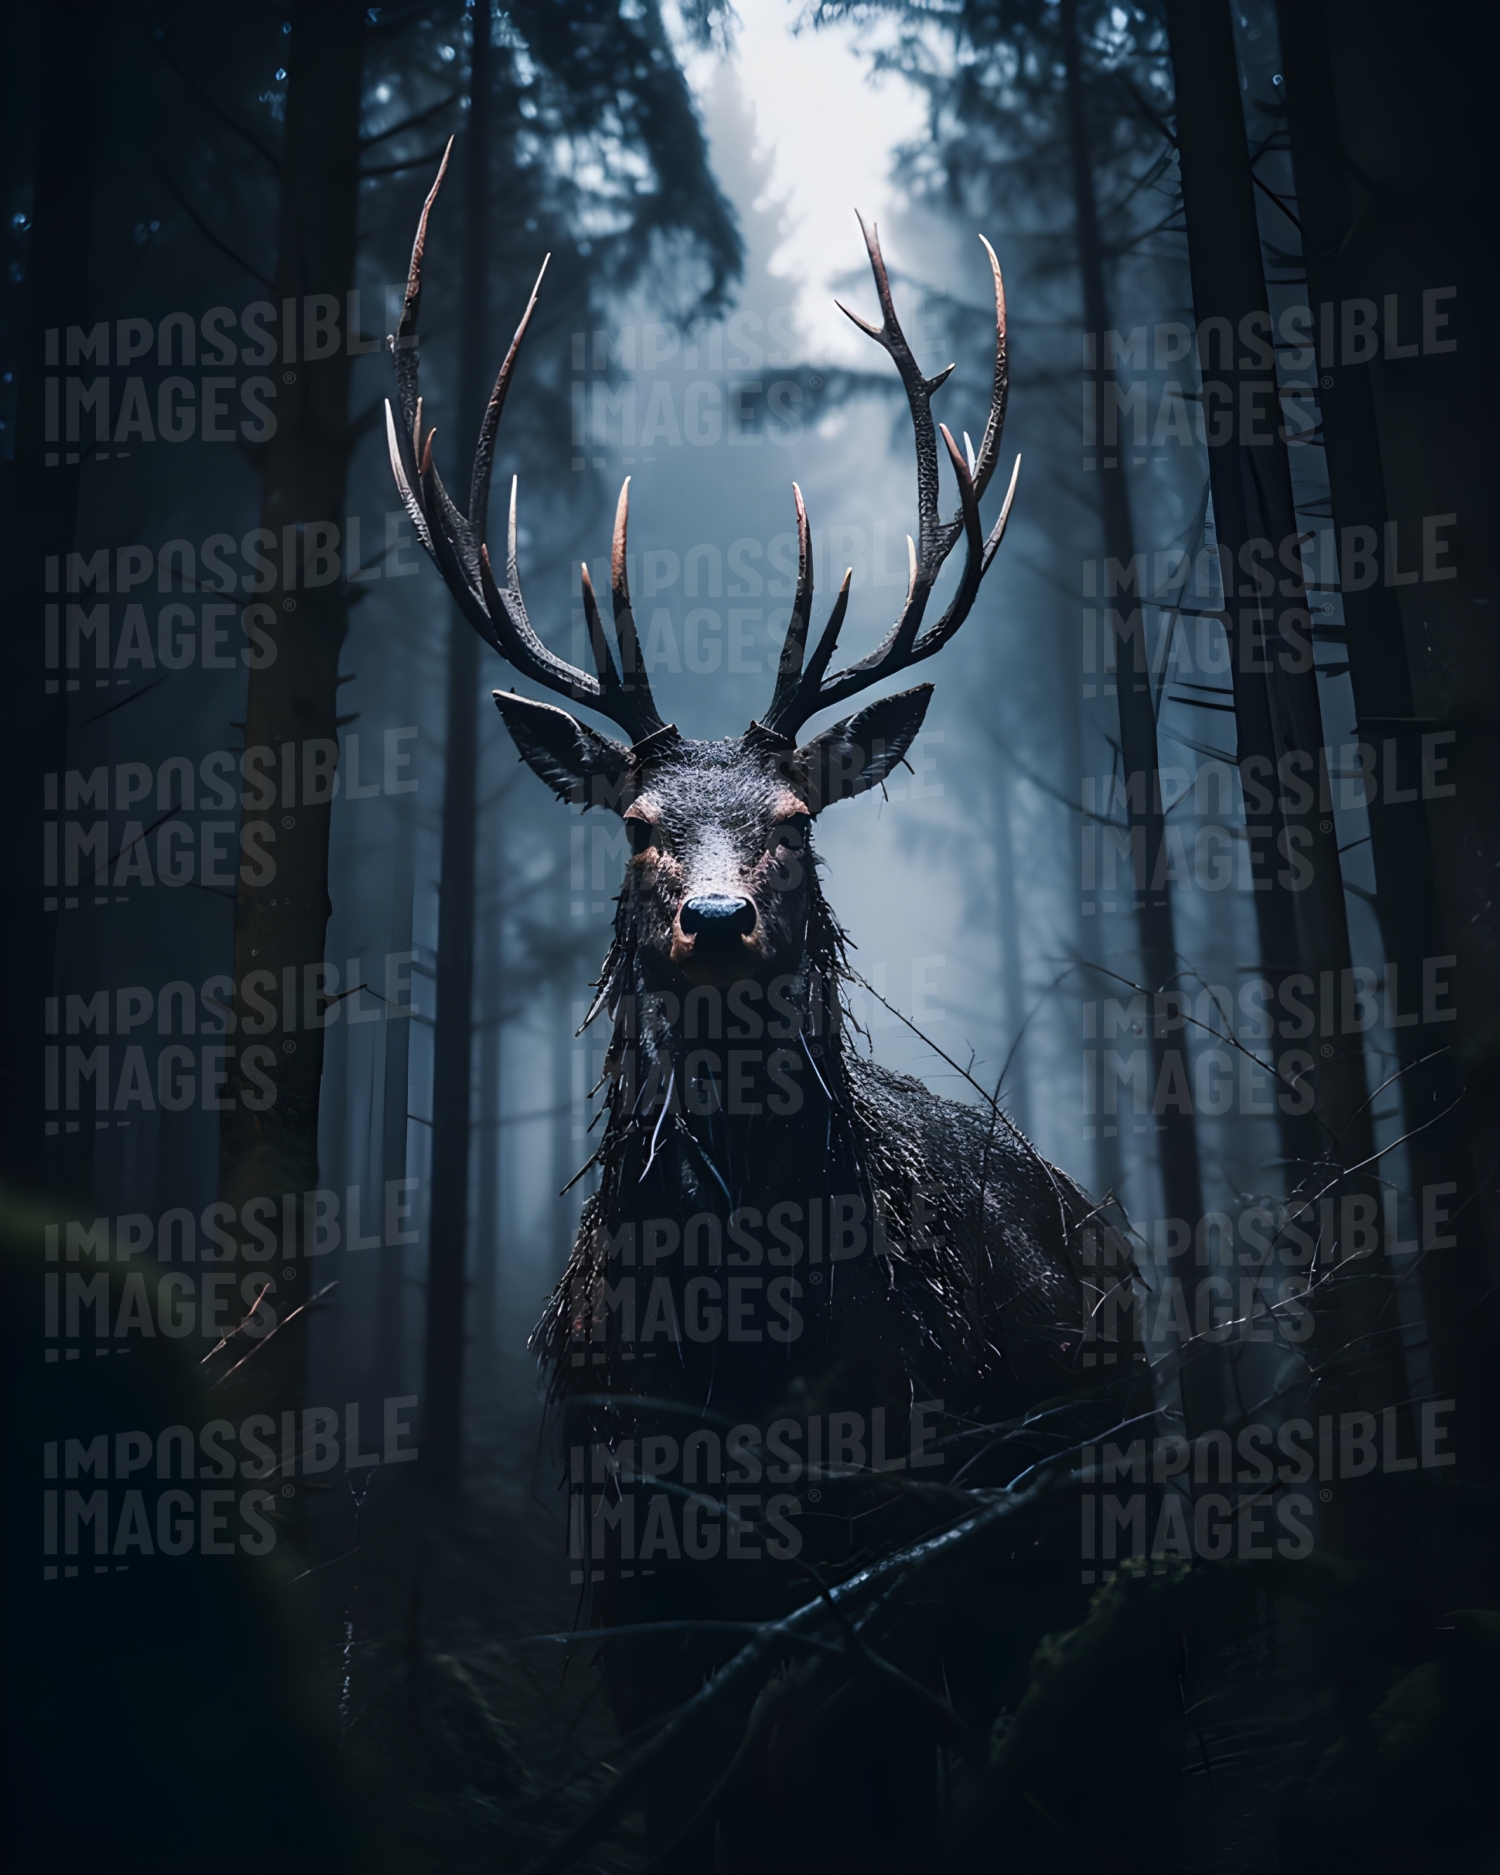 A deranged deer in the woods at dusk